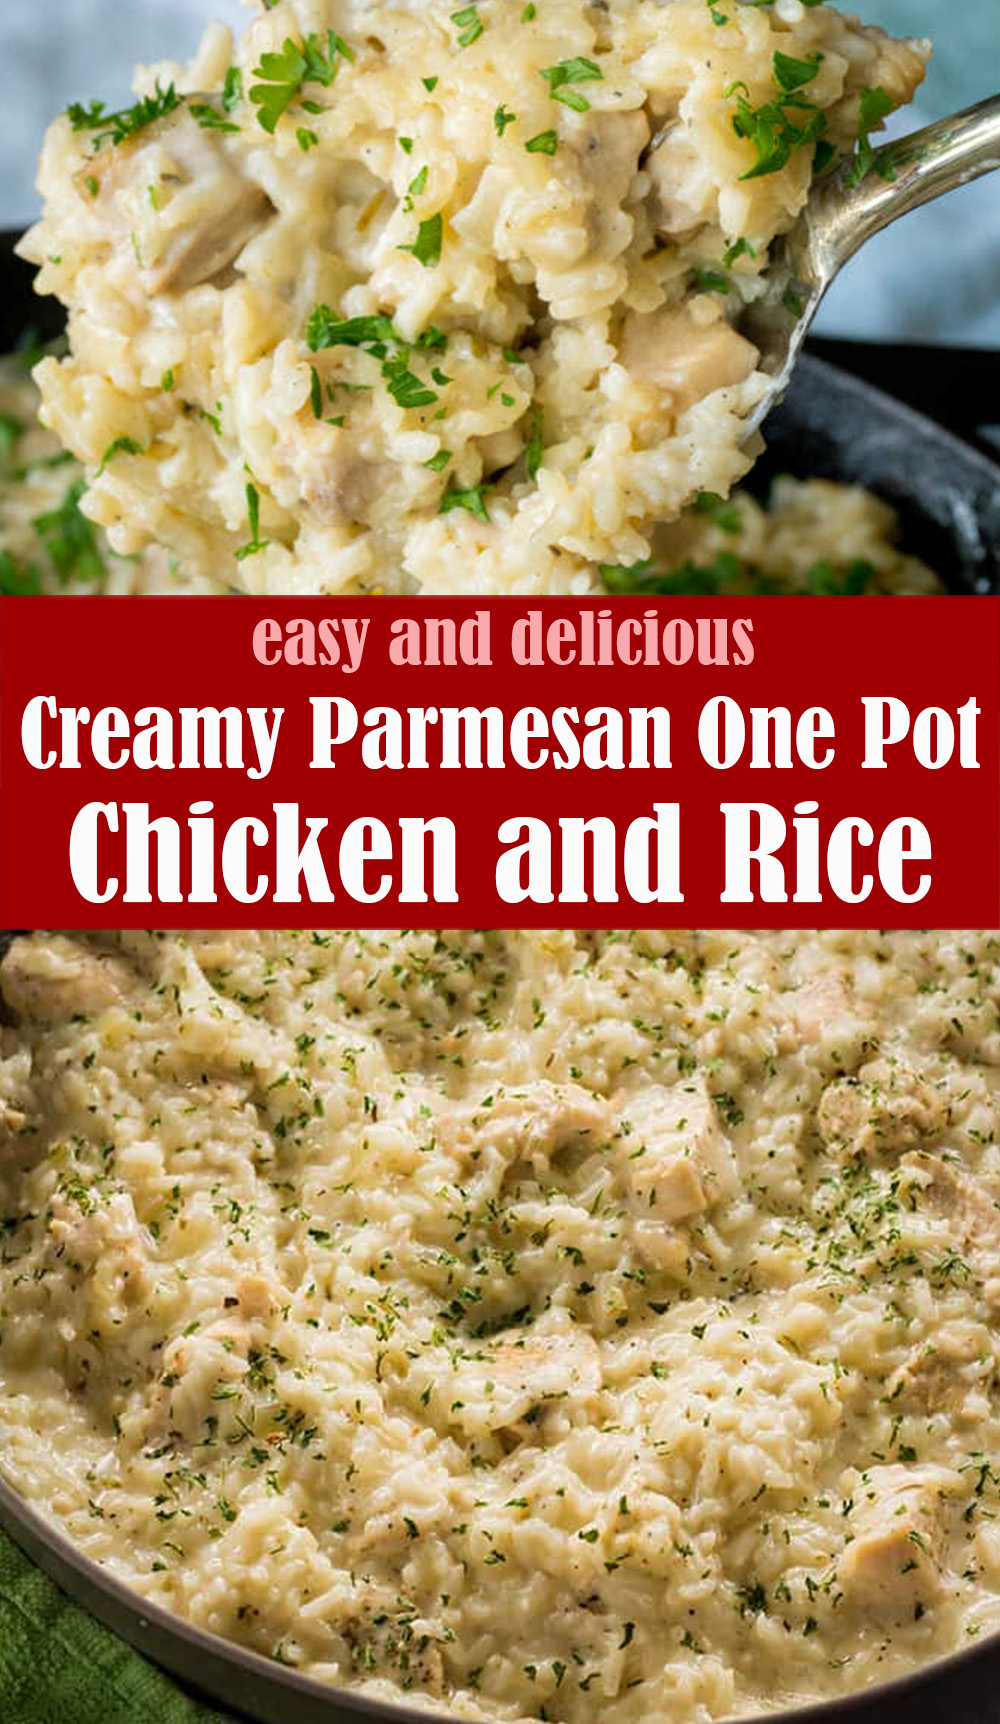 Creamy Parmesan One Pot Chicken and Rice